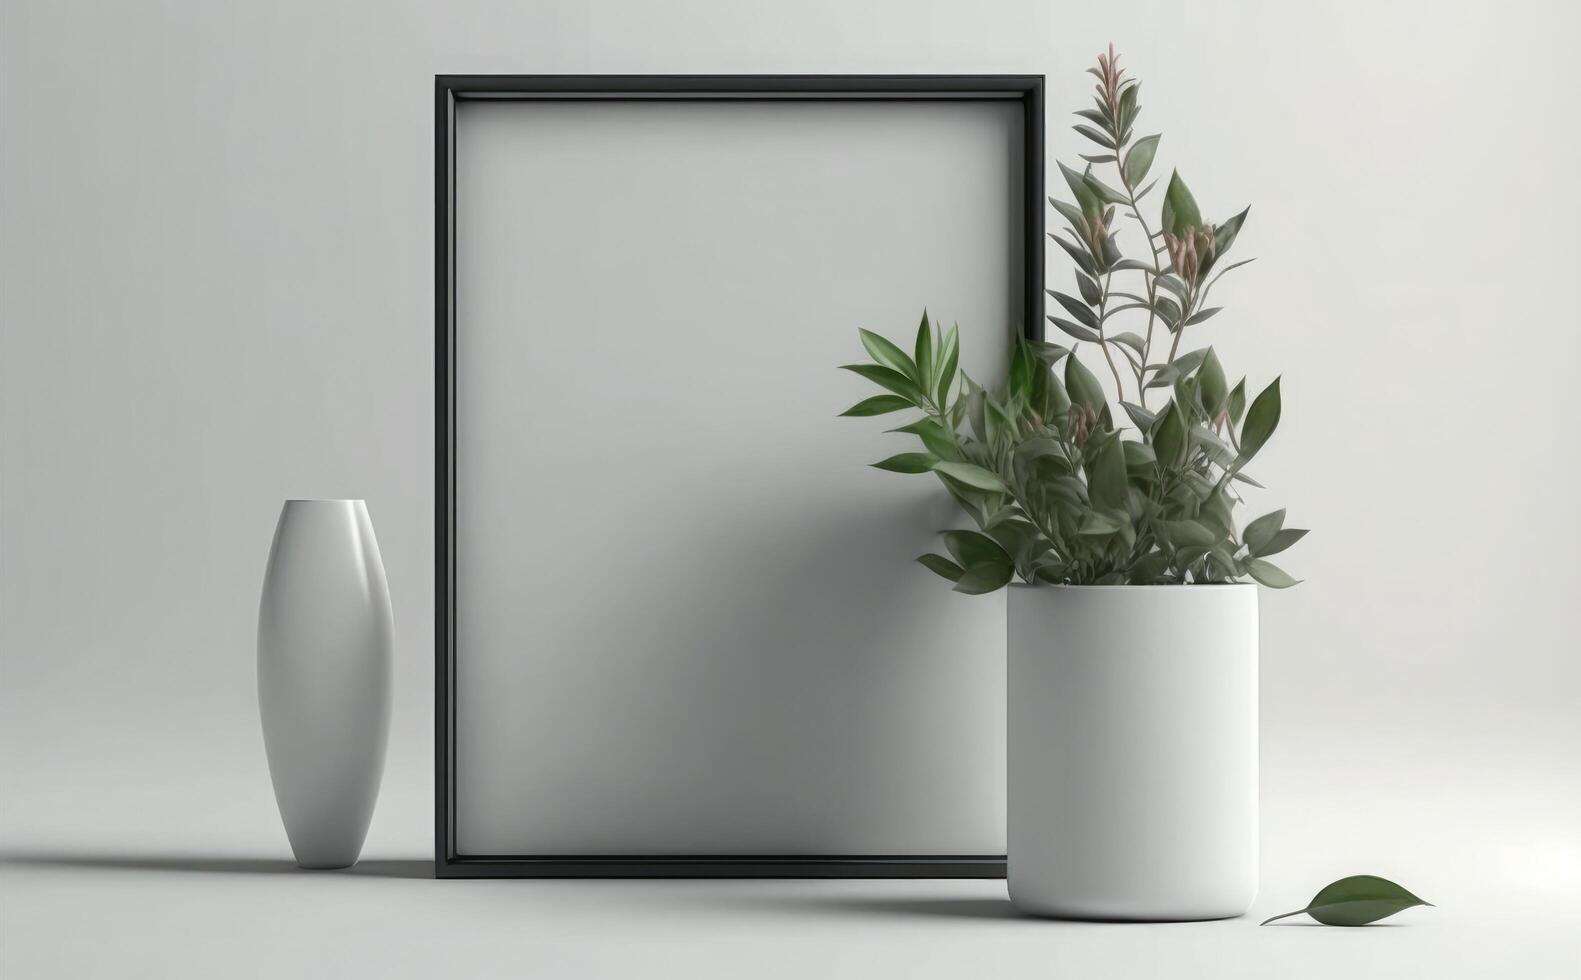 Empty picture frame mockup on a wall vertical frame mockup in modern minimalist interior with plant in trendy vase on wall background photo